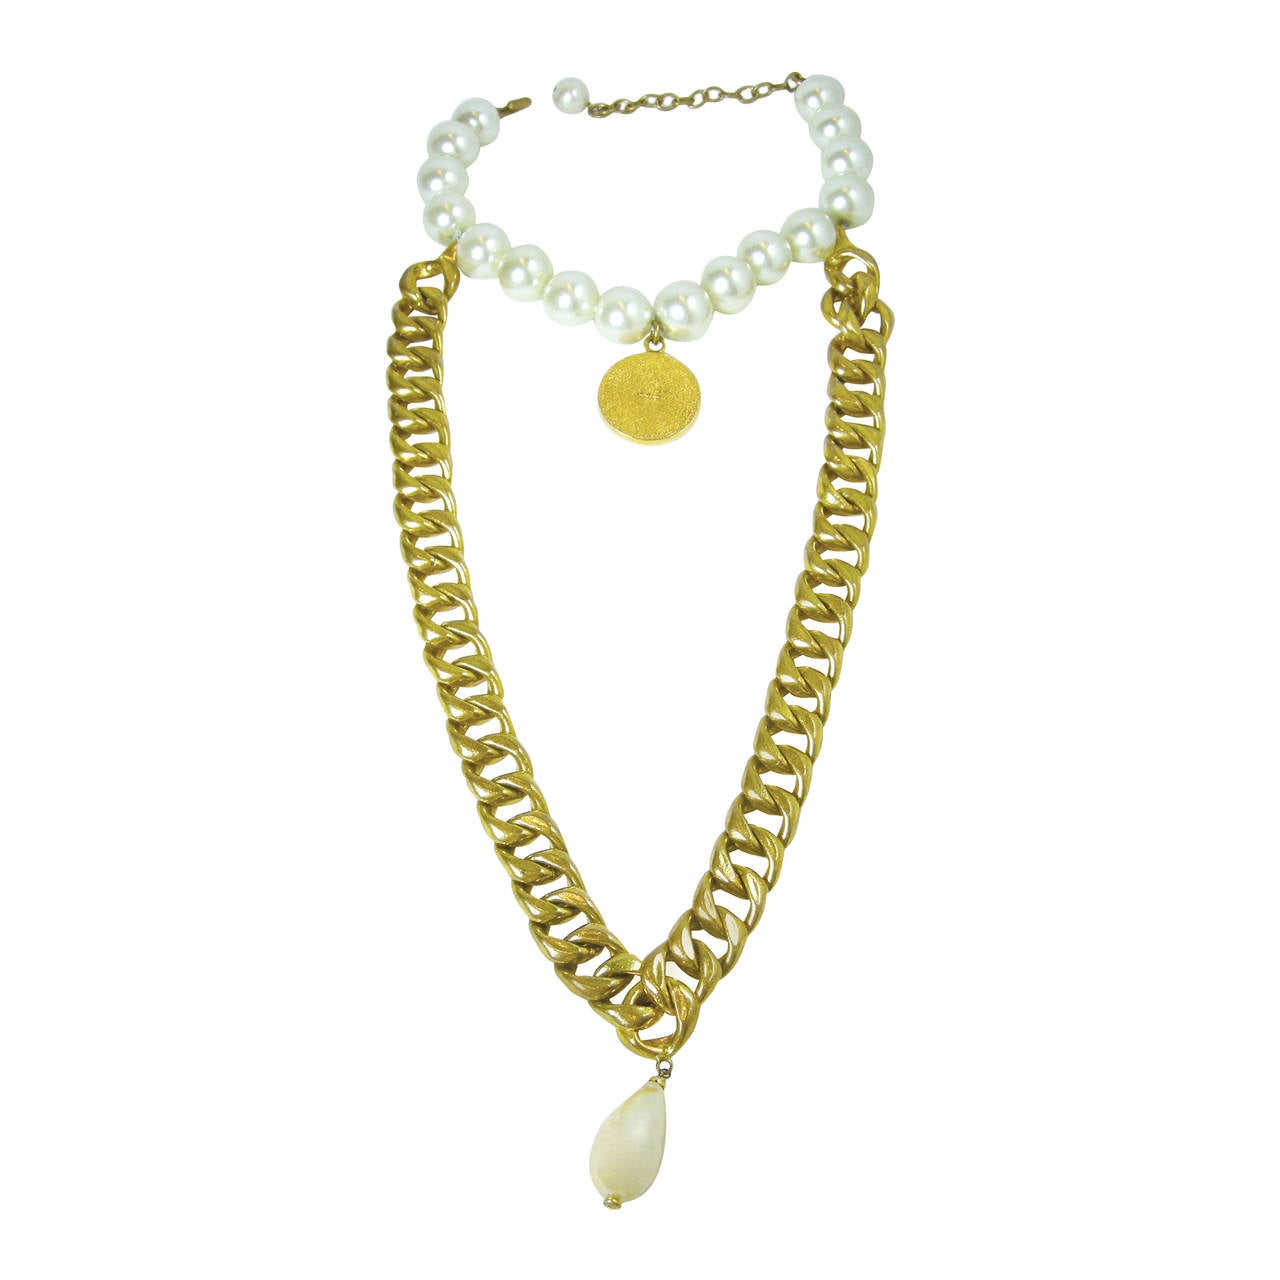 Vintage Chanel 1980s Outstanding Chain and Pearl Necklace